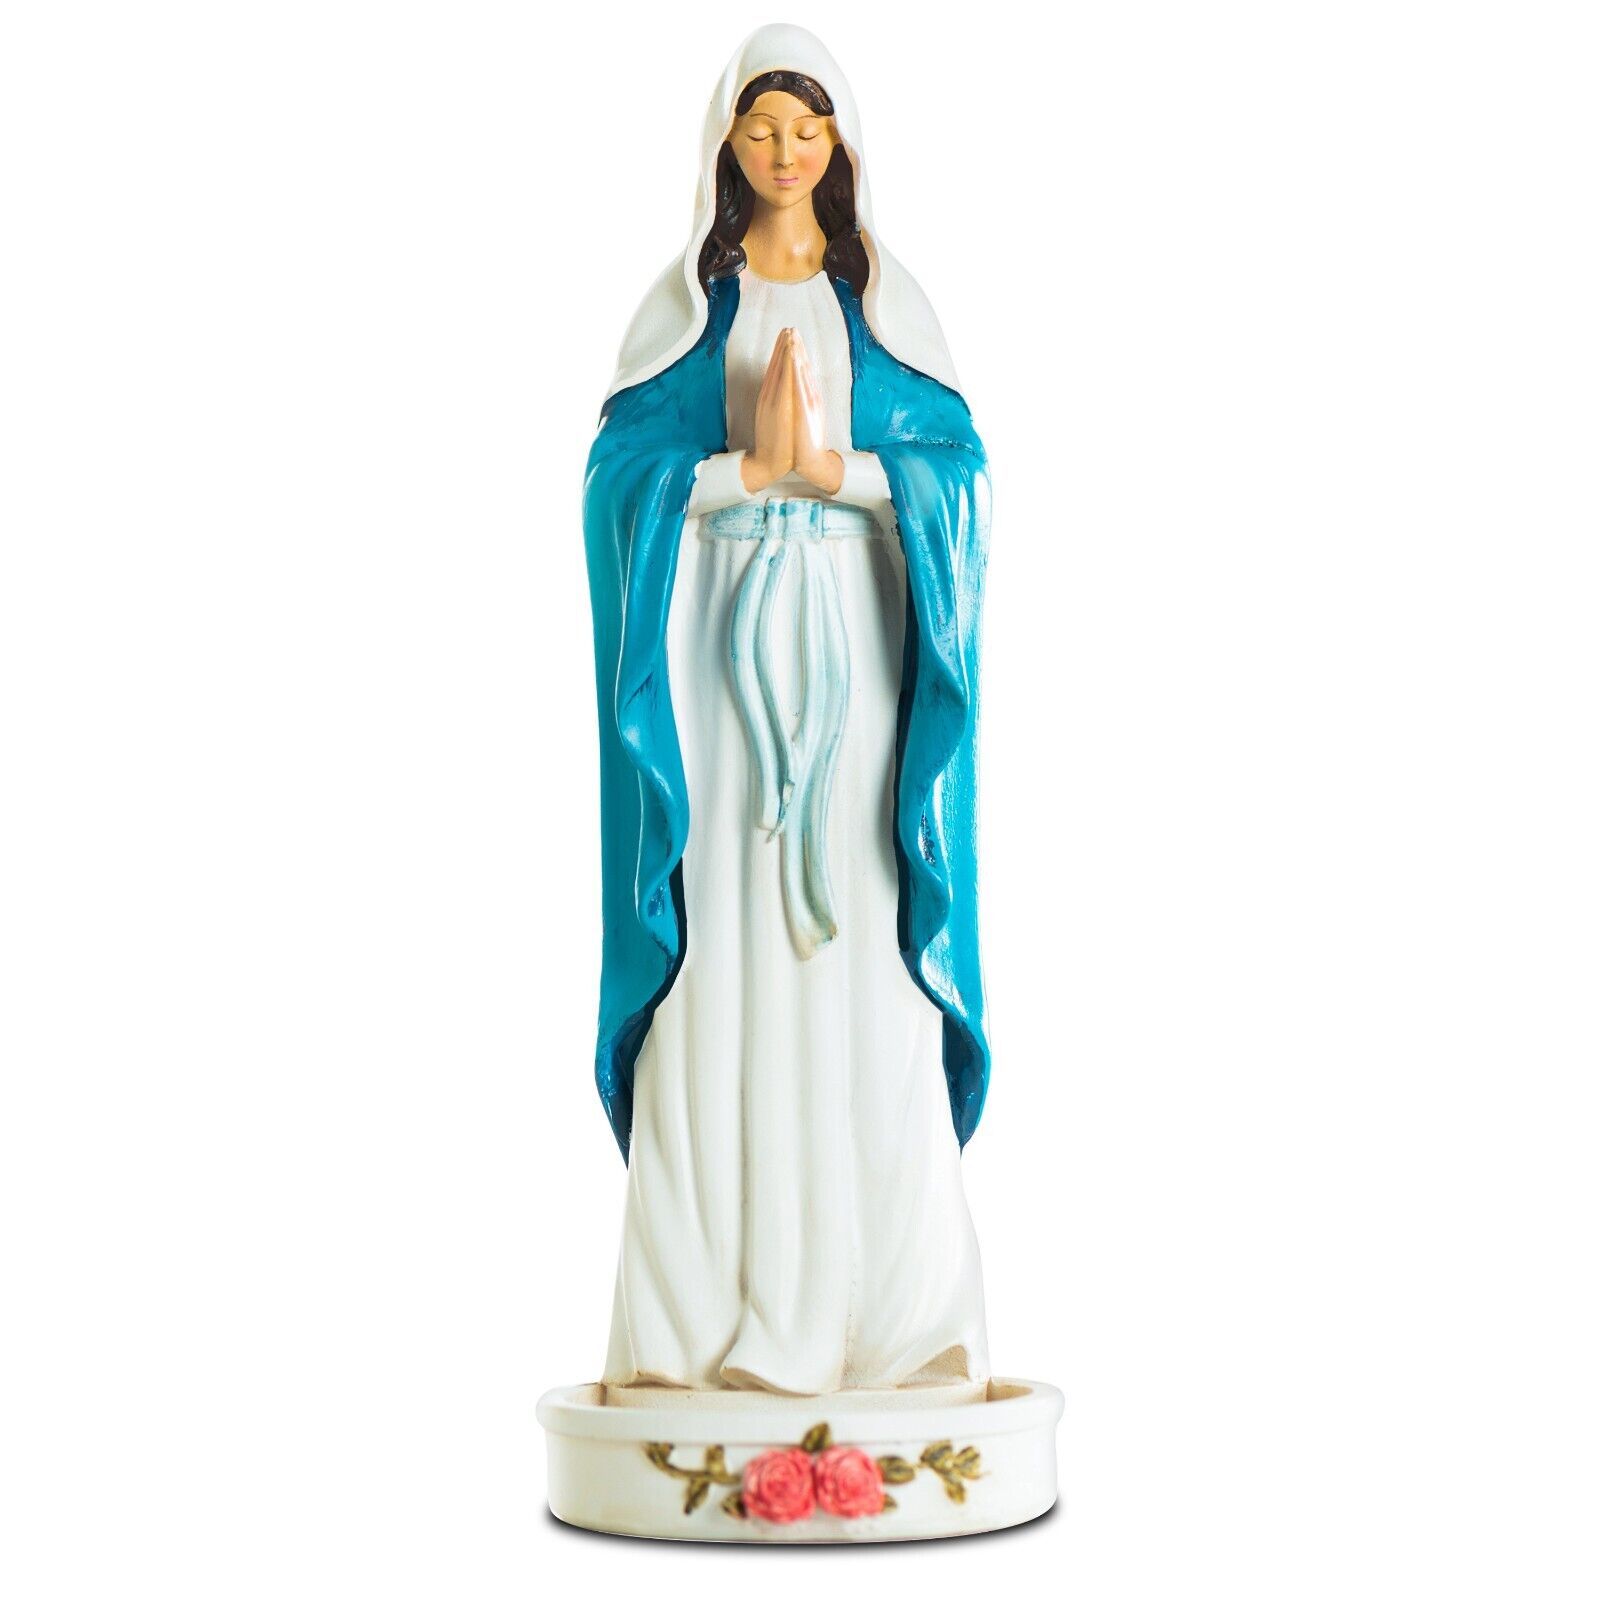 Virgin Mary Statue, Blessed Mother Mary Statue Catholic, Rosary Holder